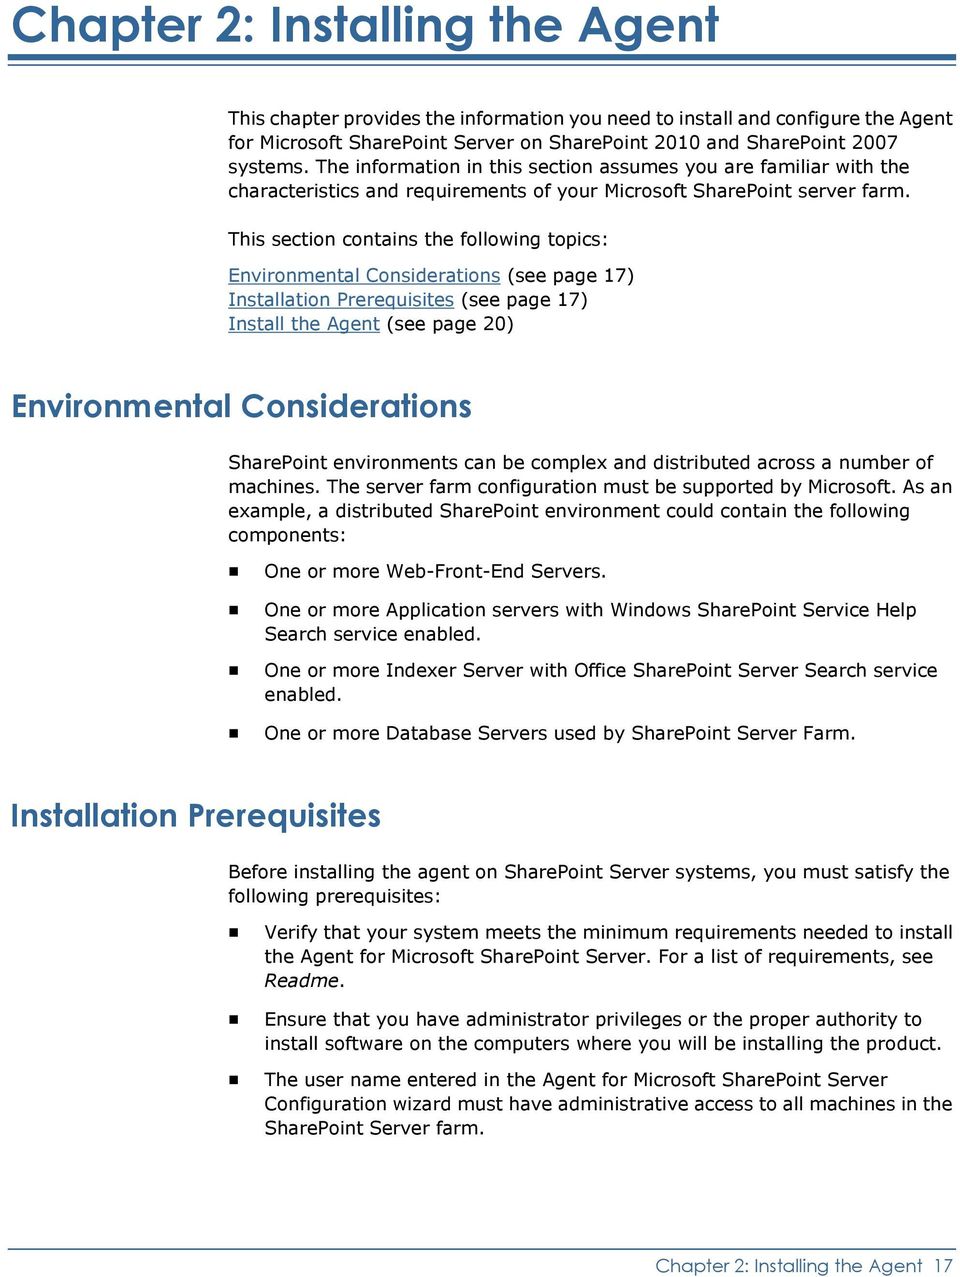 This section contains the following topics: Environmental Considerations (see page 17) Installation Prerequisites (see page 17) Install the Agent (see page 20) Environmental Considerations SharePoint